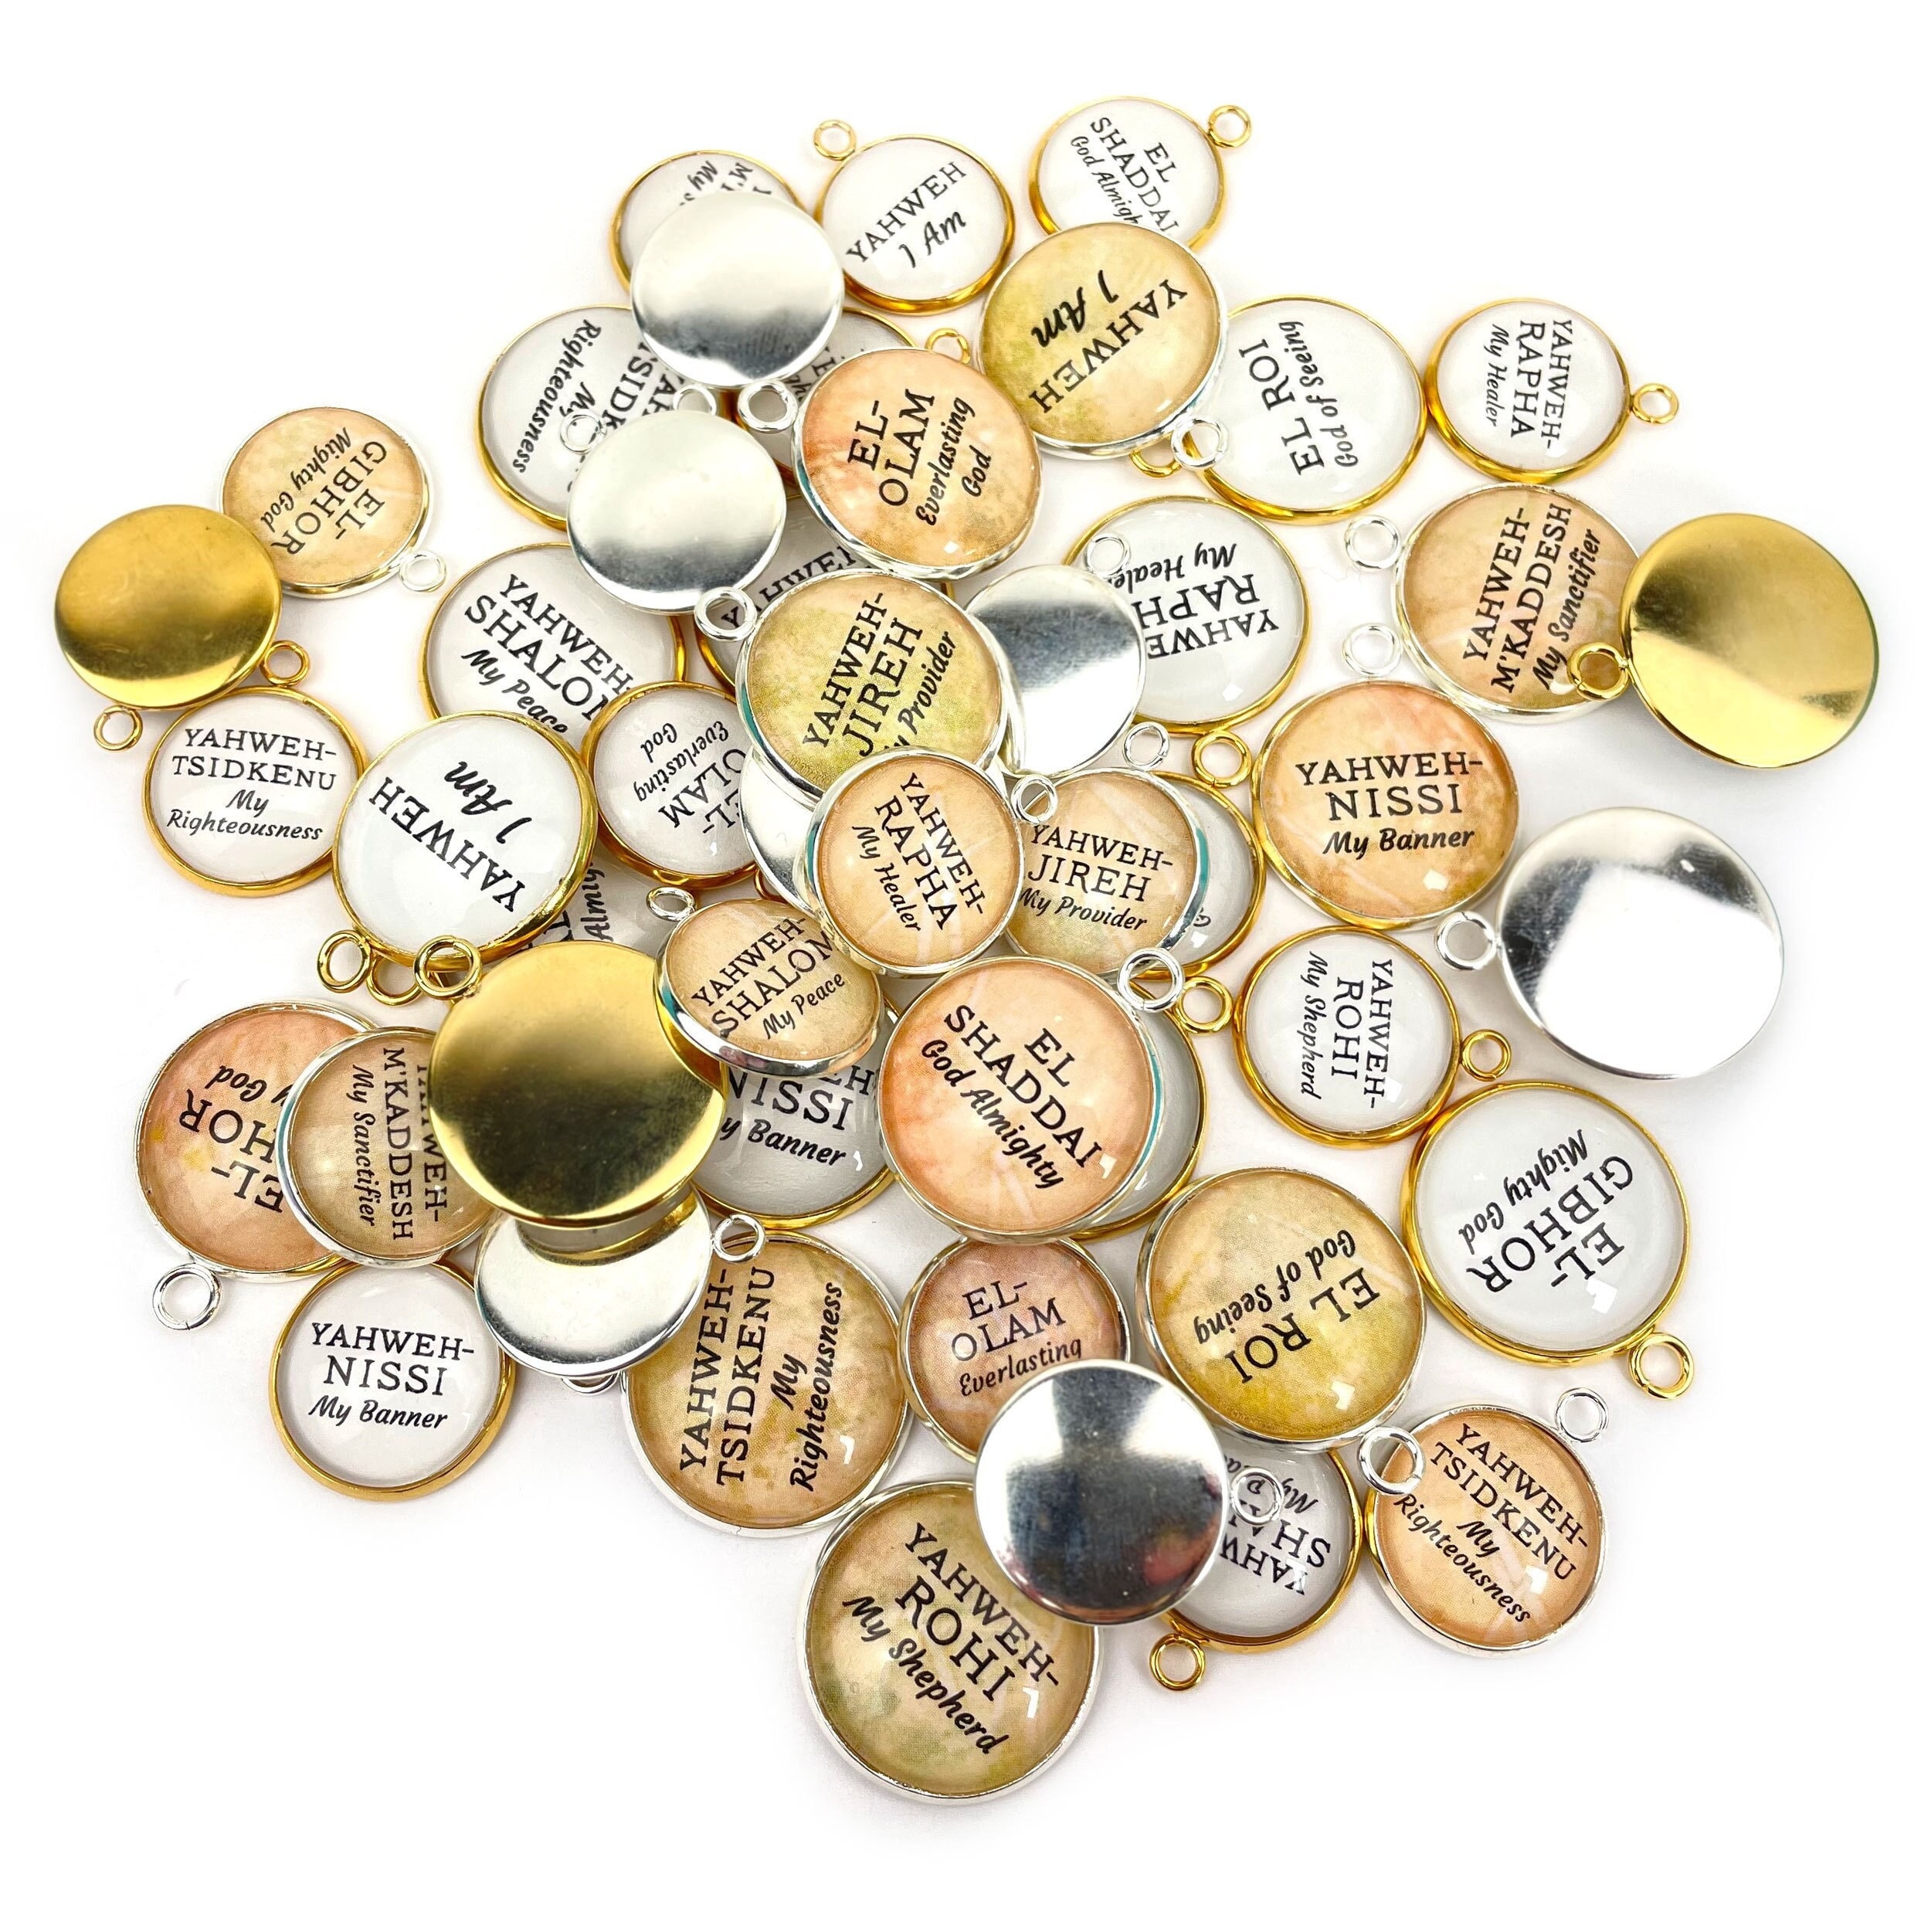 Encouragement Scriptures Set of Encouraging Jewelry Making Charms 16mm / Silver / 4 Sets (48 Charms)